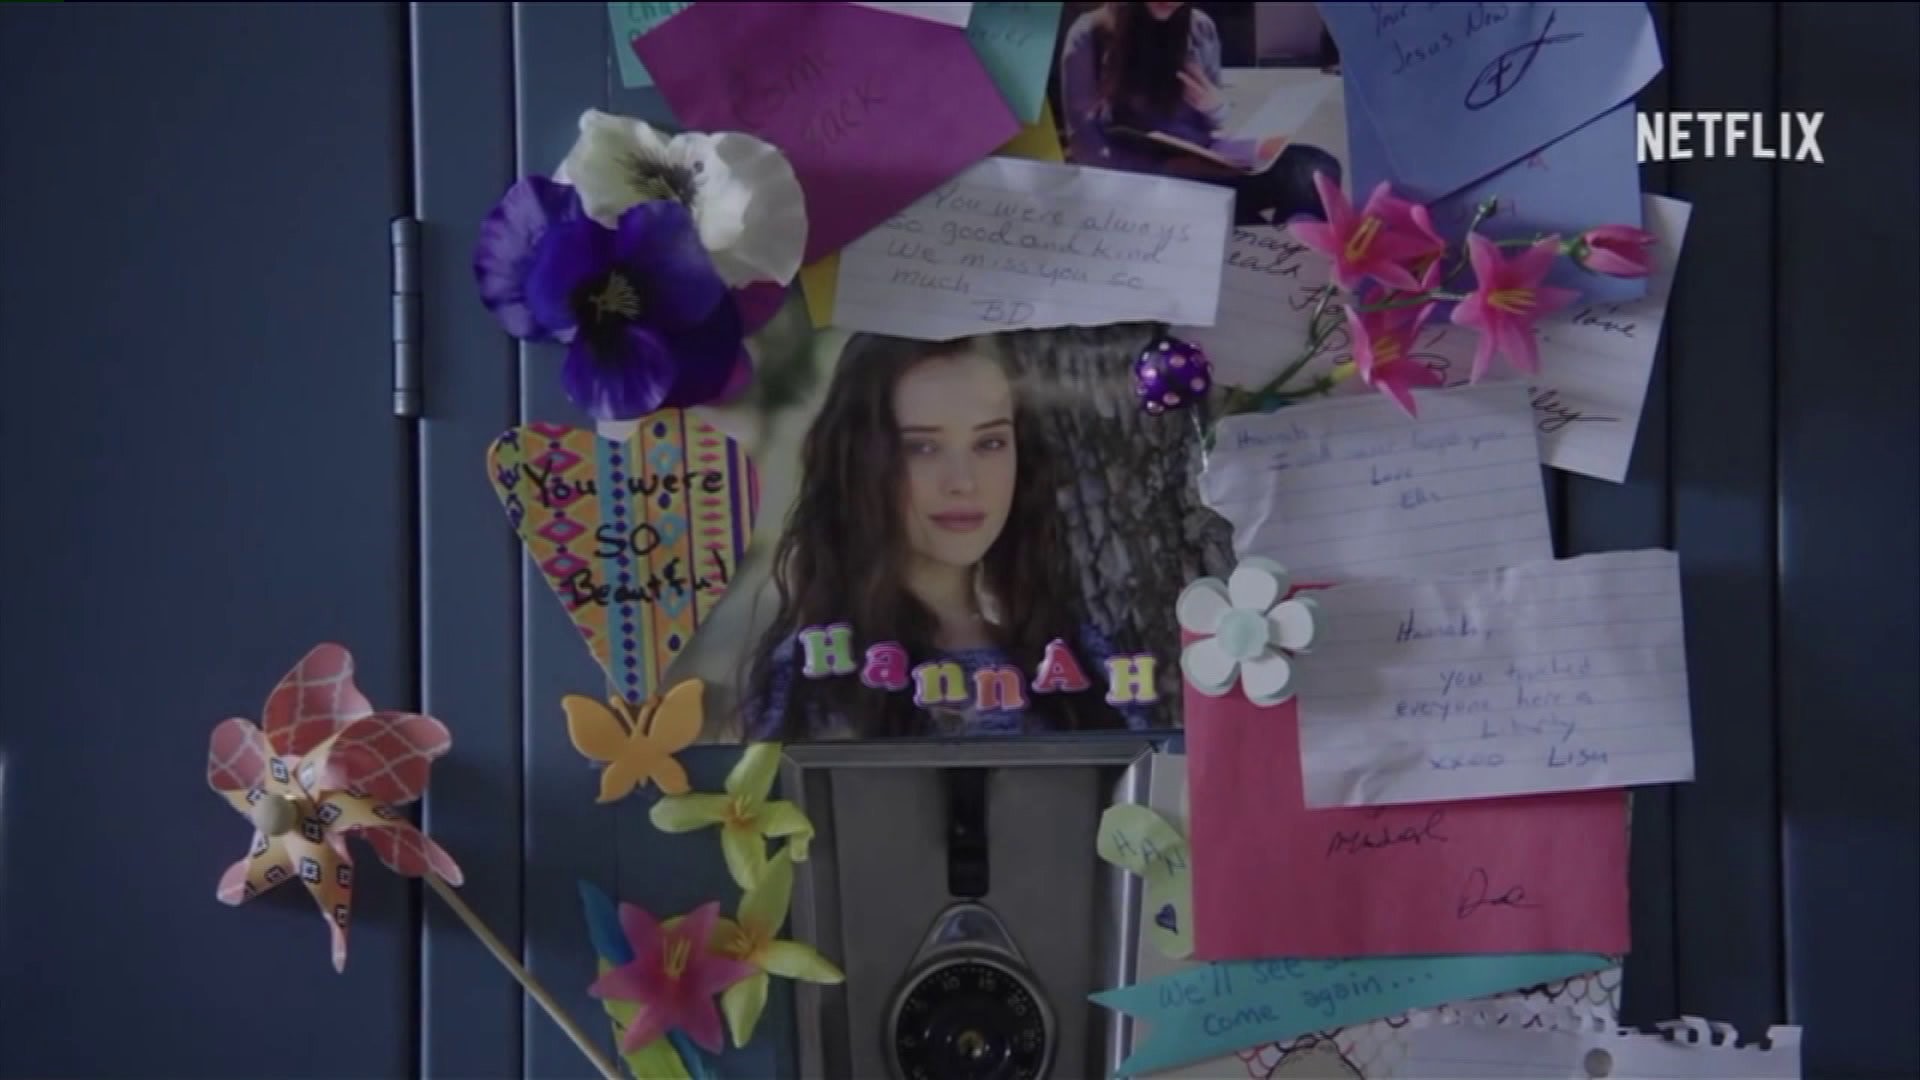 Educators and students speaking out about Netflix`s new series `13 Reasons Why`